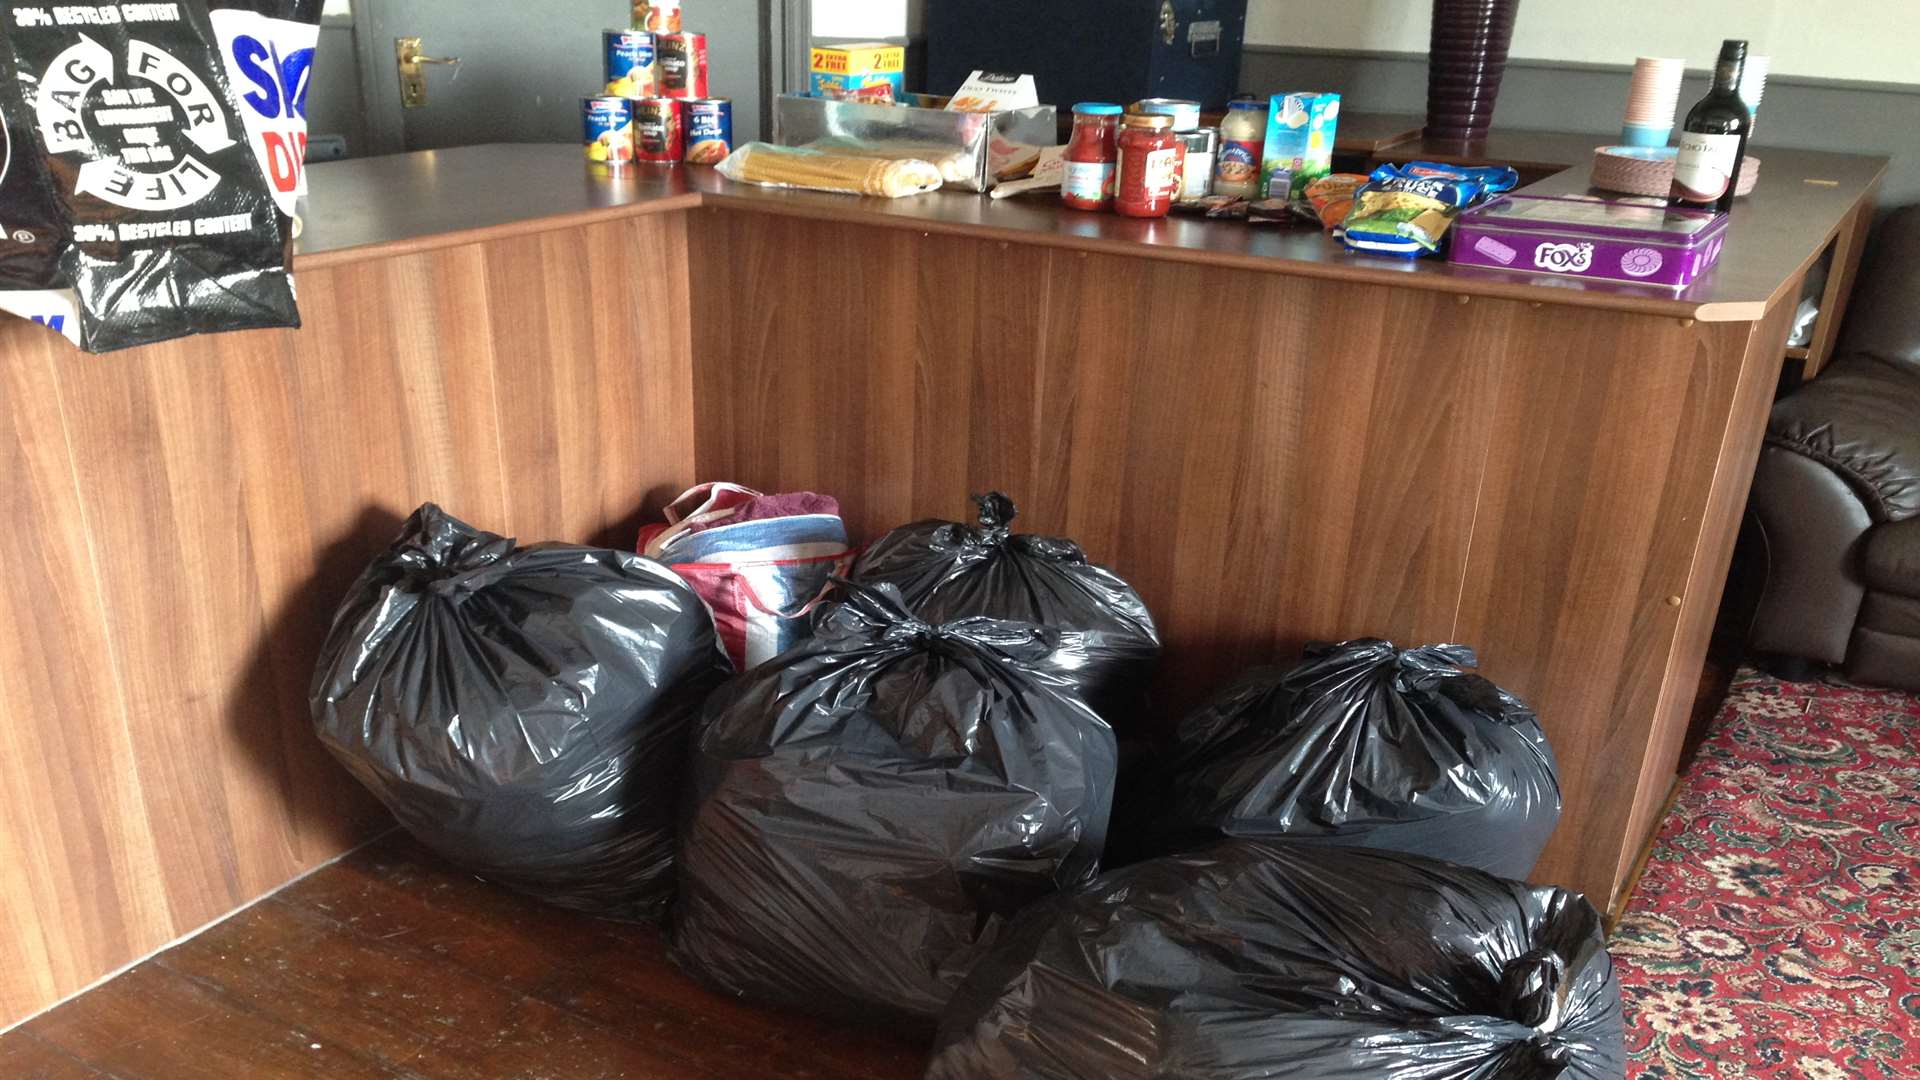 Sackloads of donations have been collected